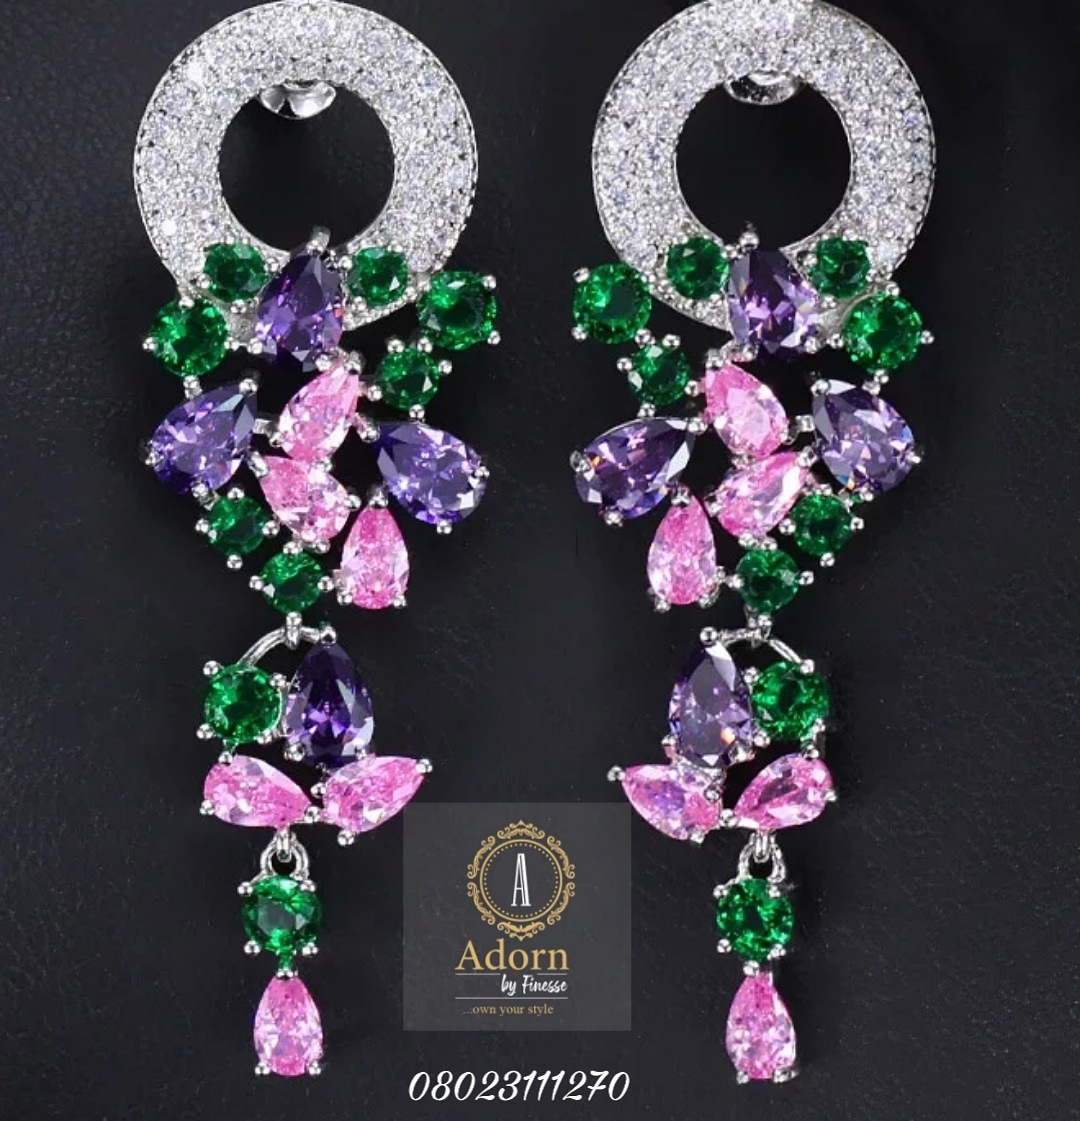 Make a statement! Get #adorned with this beautiful #Earings with Cubic Zircon stones👍 
🙏DM for price.  
👉 wa.me/2348023111270 
Available for immediate delivery.
#WhatsApp
#jewelry
#jewelryaddicts
#owambe
#owambenaija
#jewelrylover
#zirconia
#jewelrylovers
#zircon